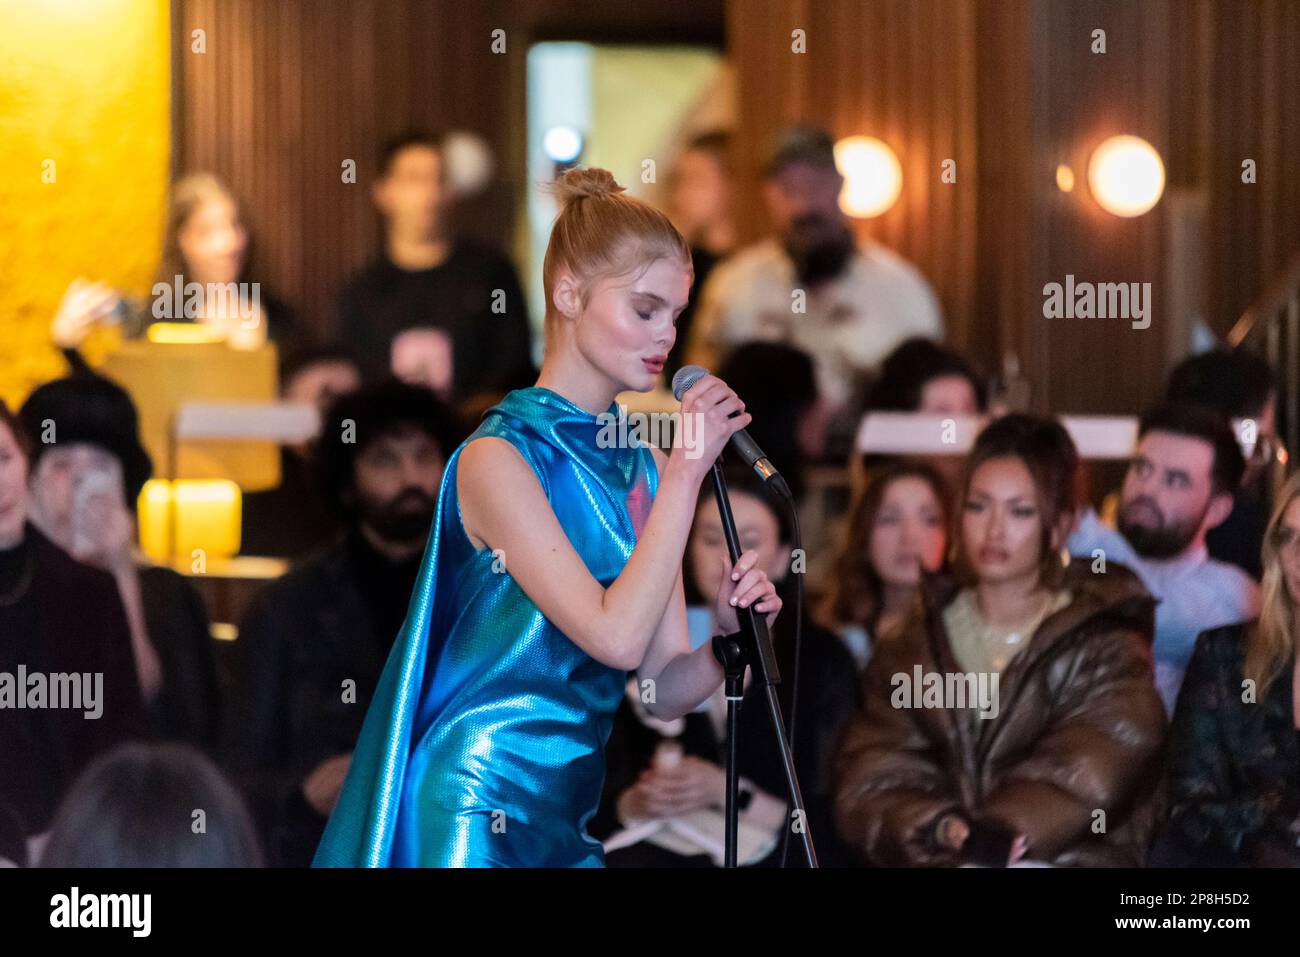 VIN+OMI fashion show in collaboration with King Charles III, creating fashion from recycling. Megan Rutherford singing during event in 100 Shoreditch Stock Photo